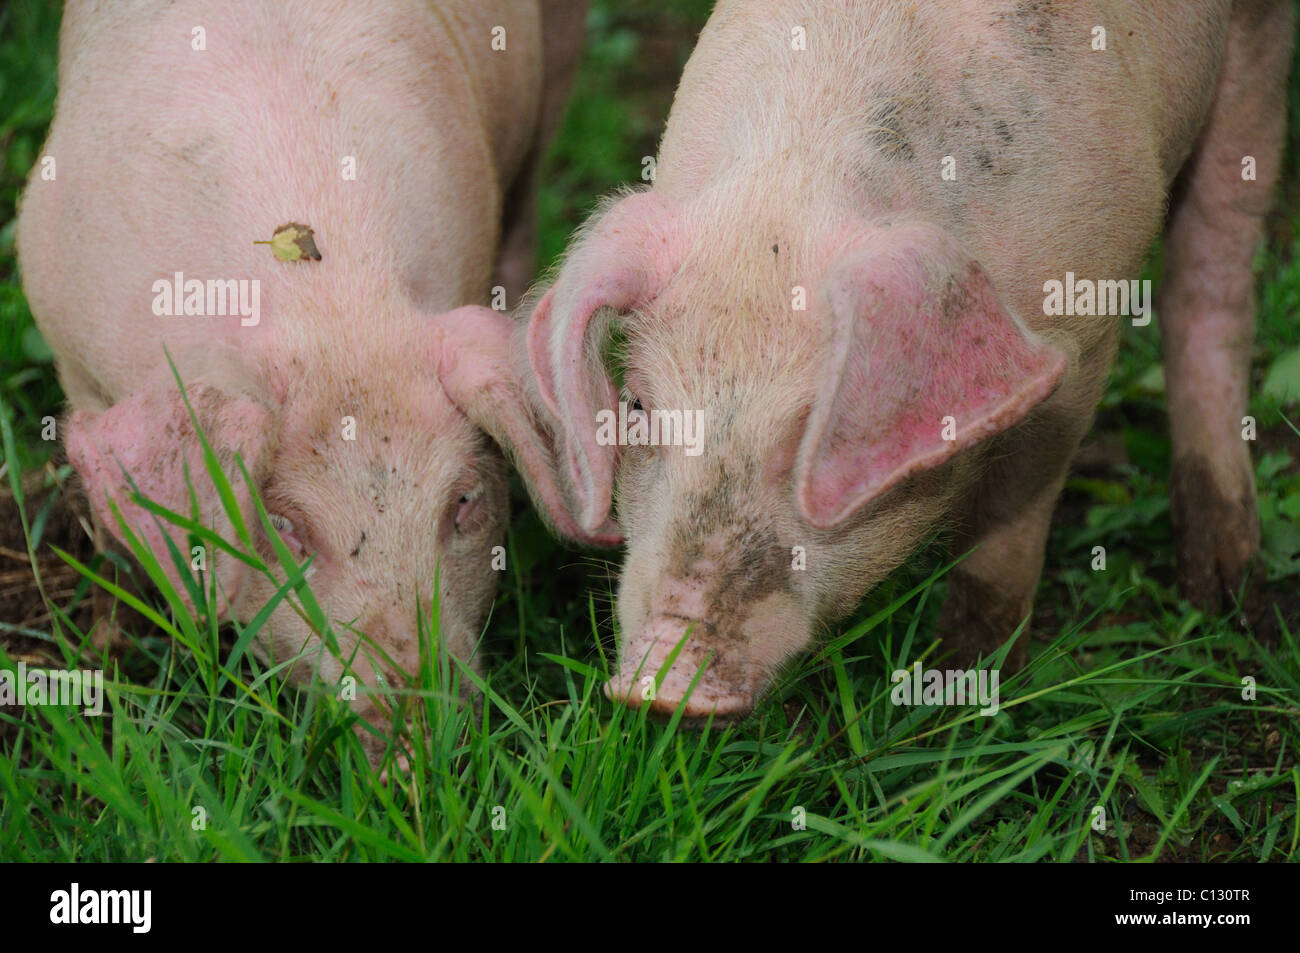 Two young pigs eating grass Stock Photo